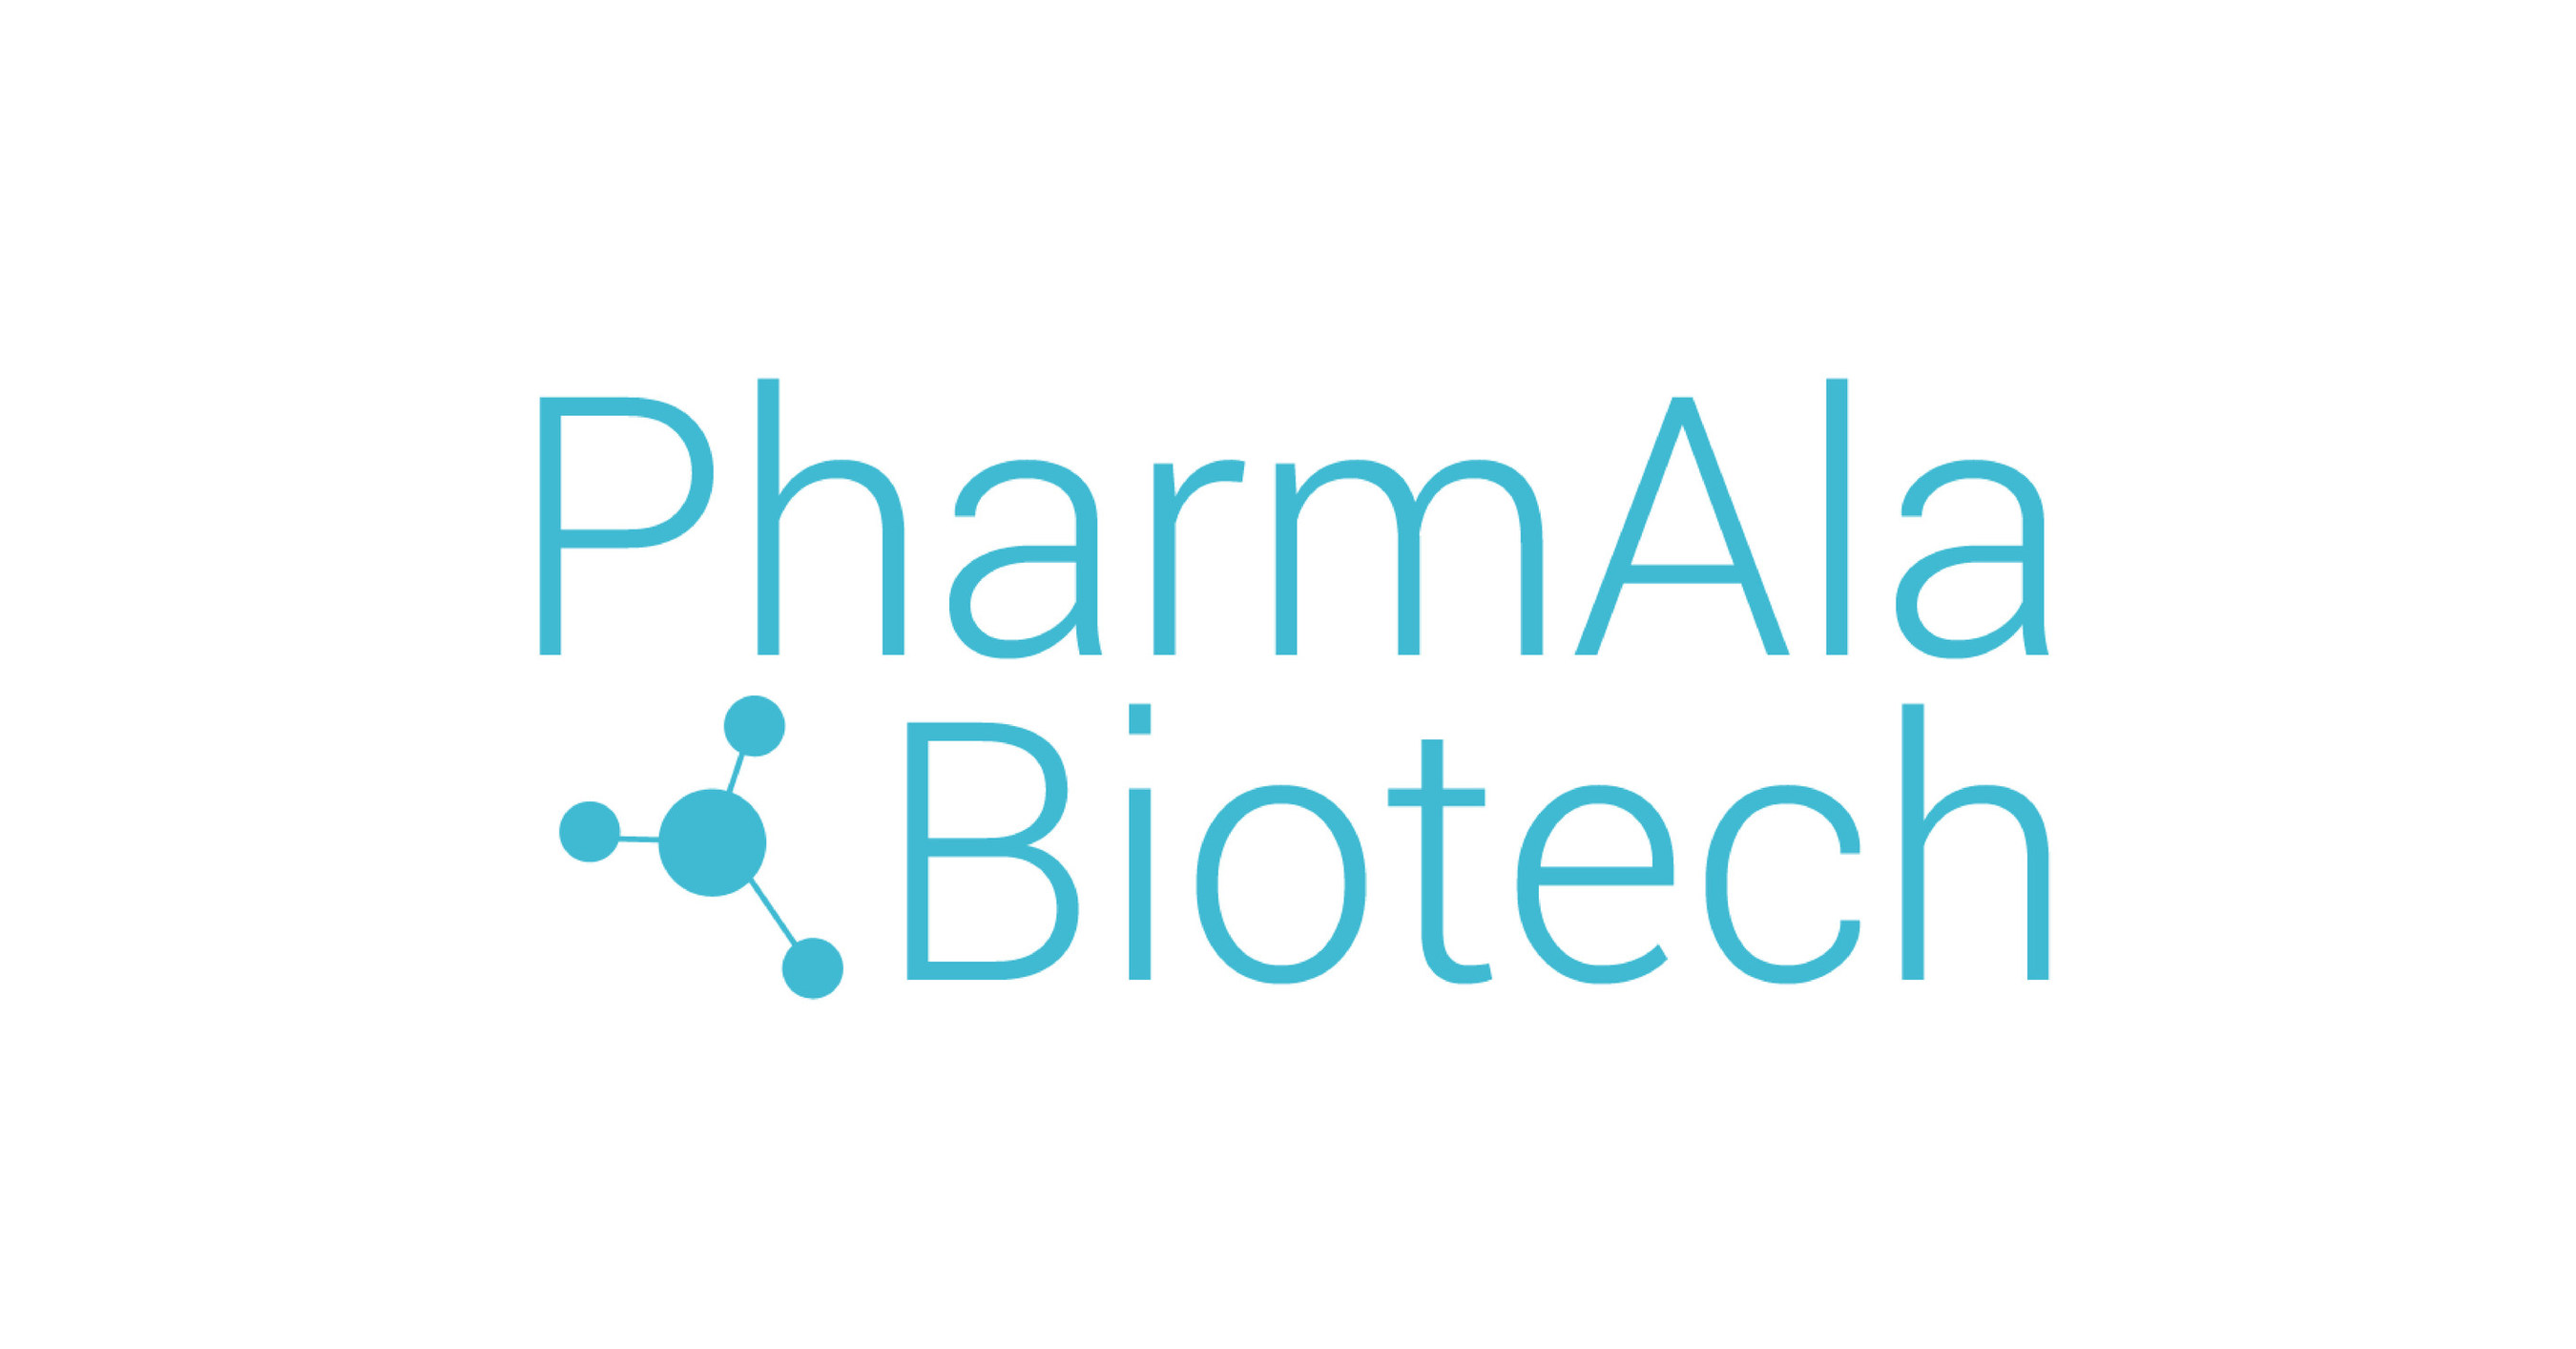 PharmAla appoints Dr. Leah Mayo to Scientific Advisory Board